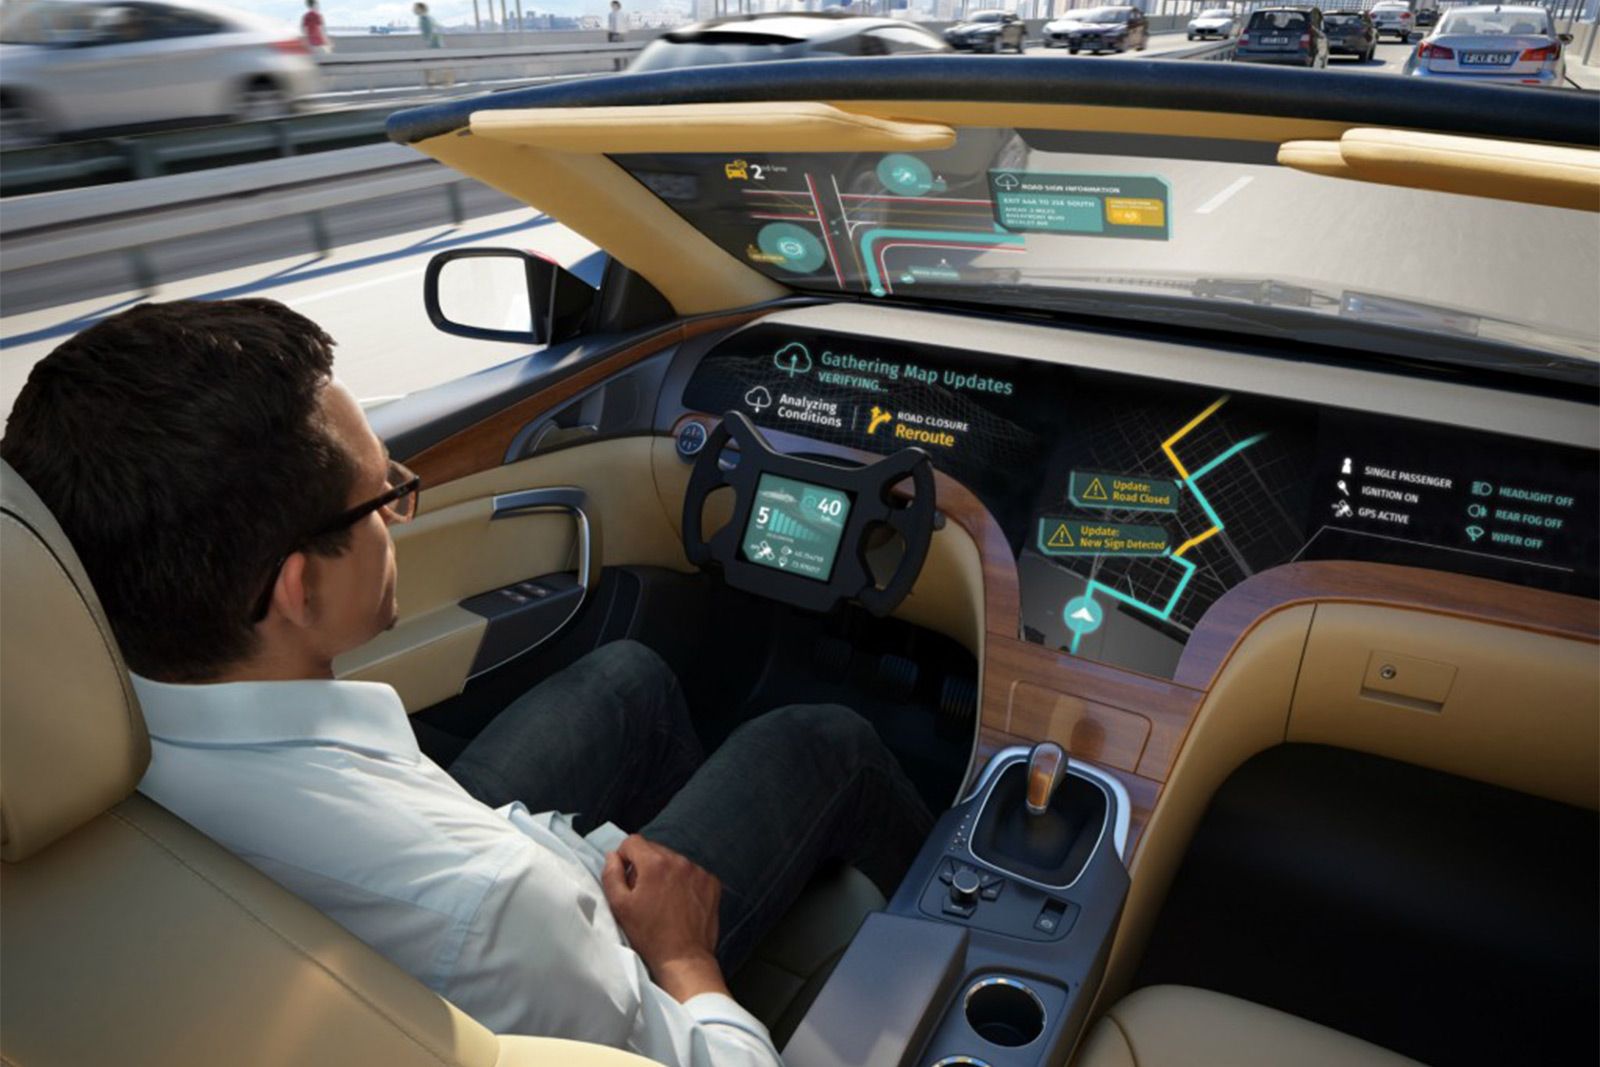 LG and Here to collaborate on advanced telematics for self-driving cars image 1